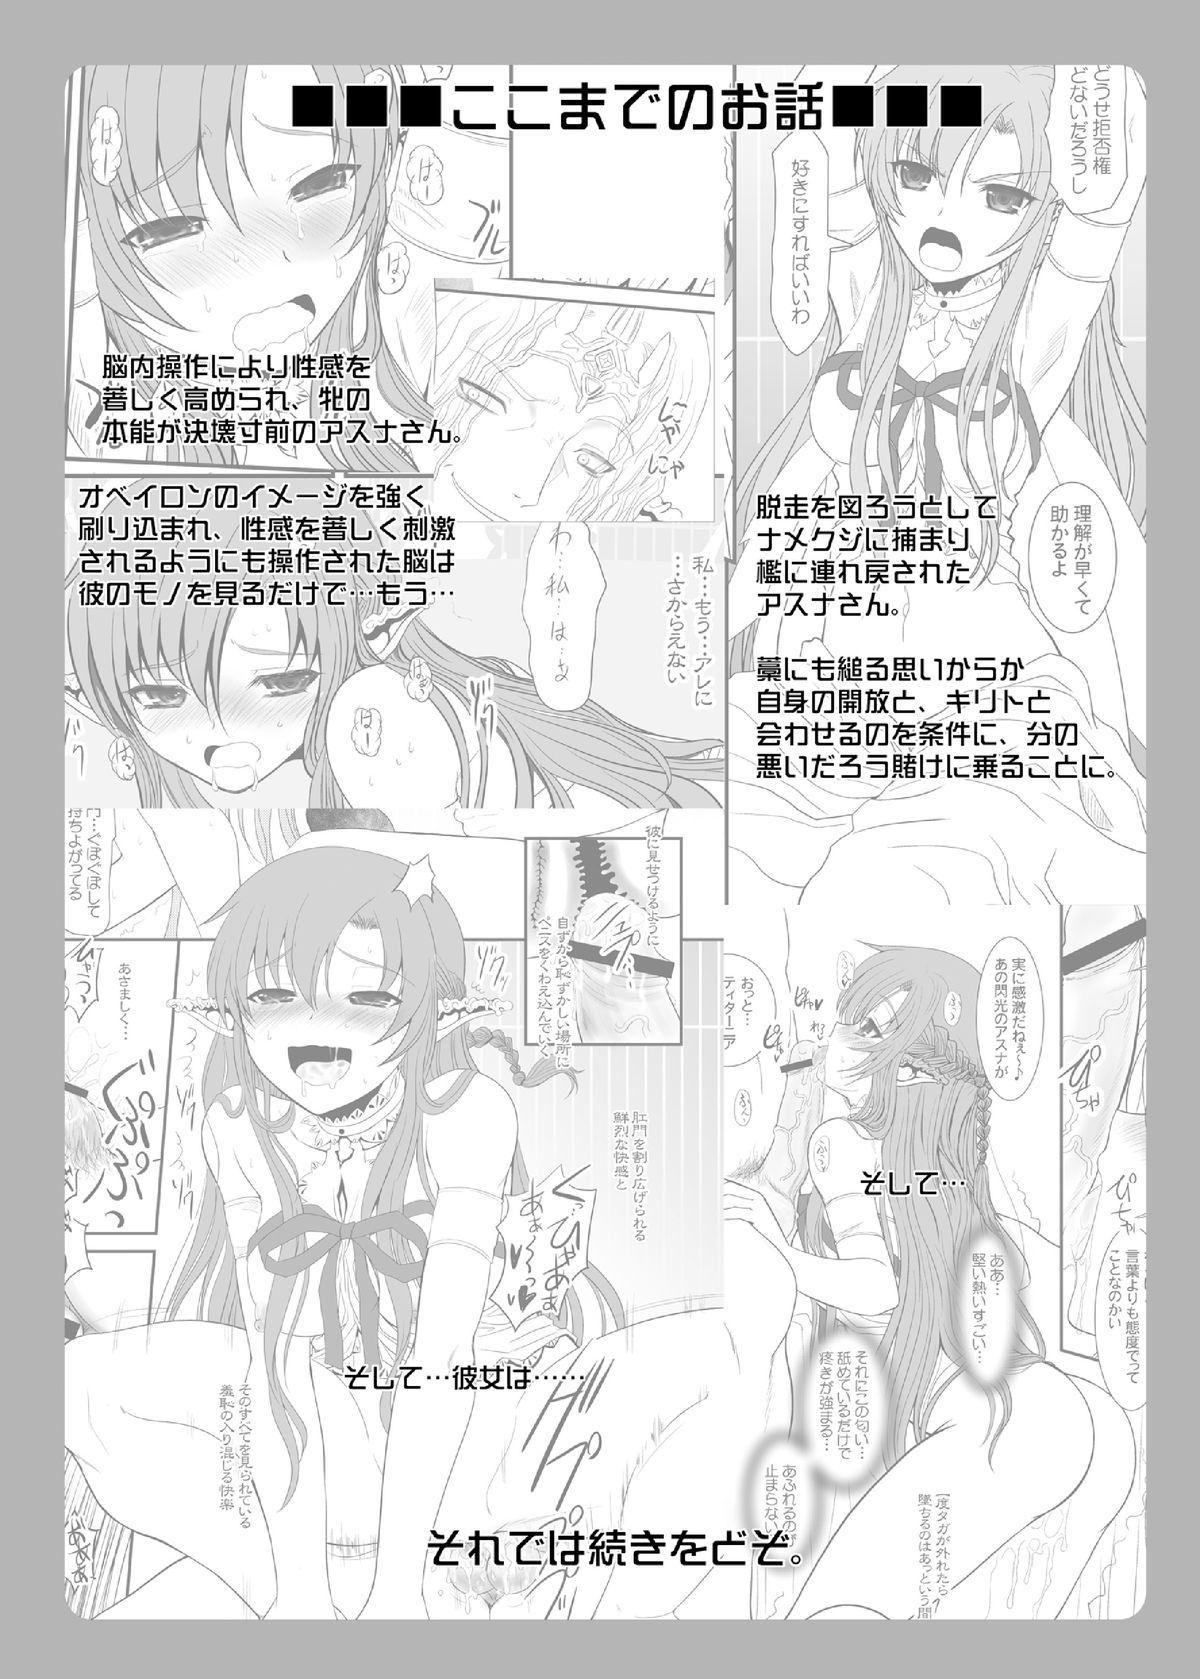 Tiny Girl Slave Asuna On-Demand 2 - Sword art online Cougar - Page 3